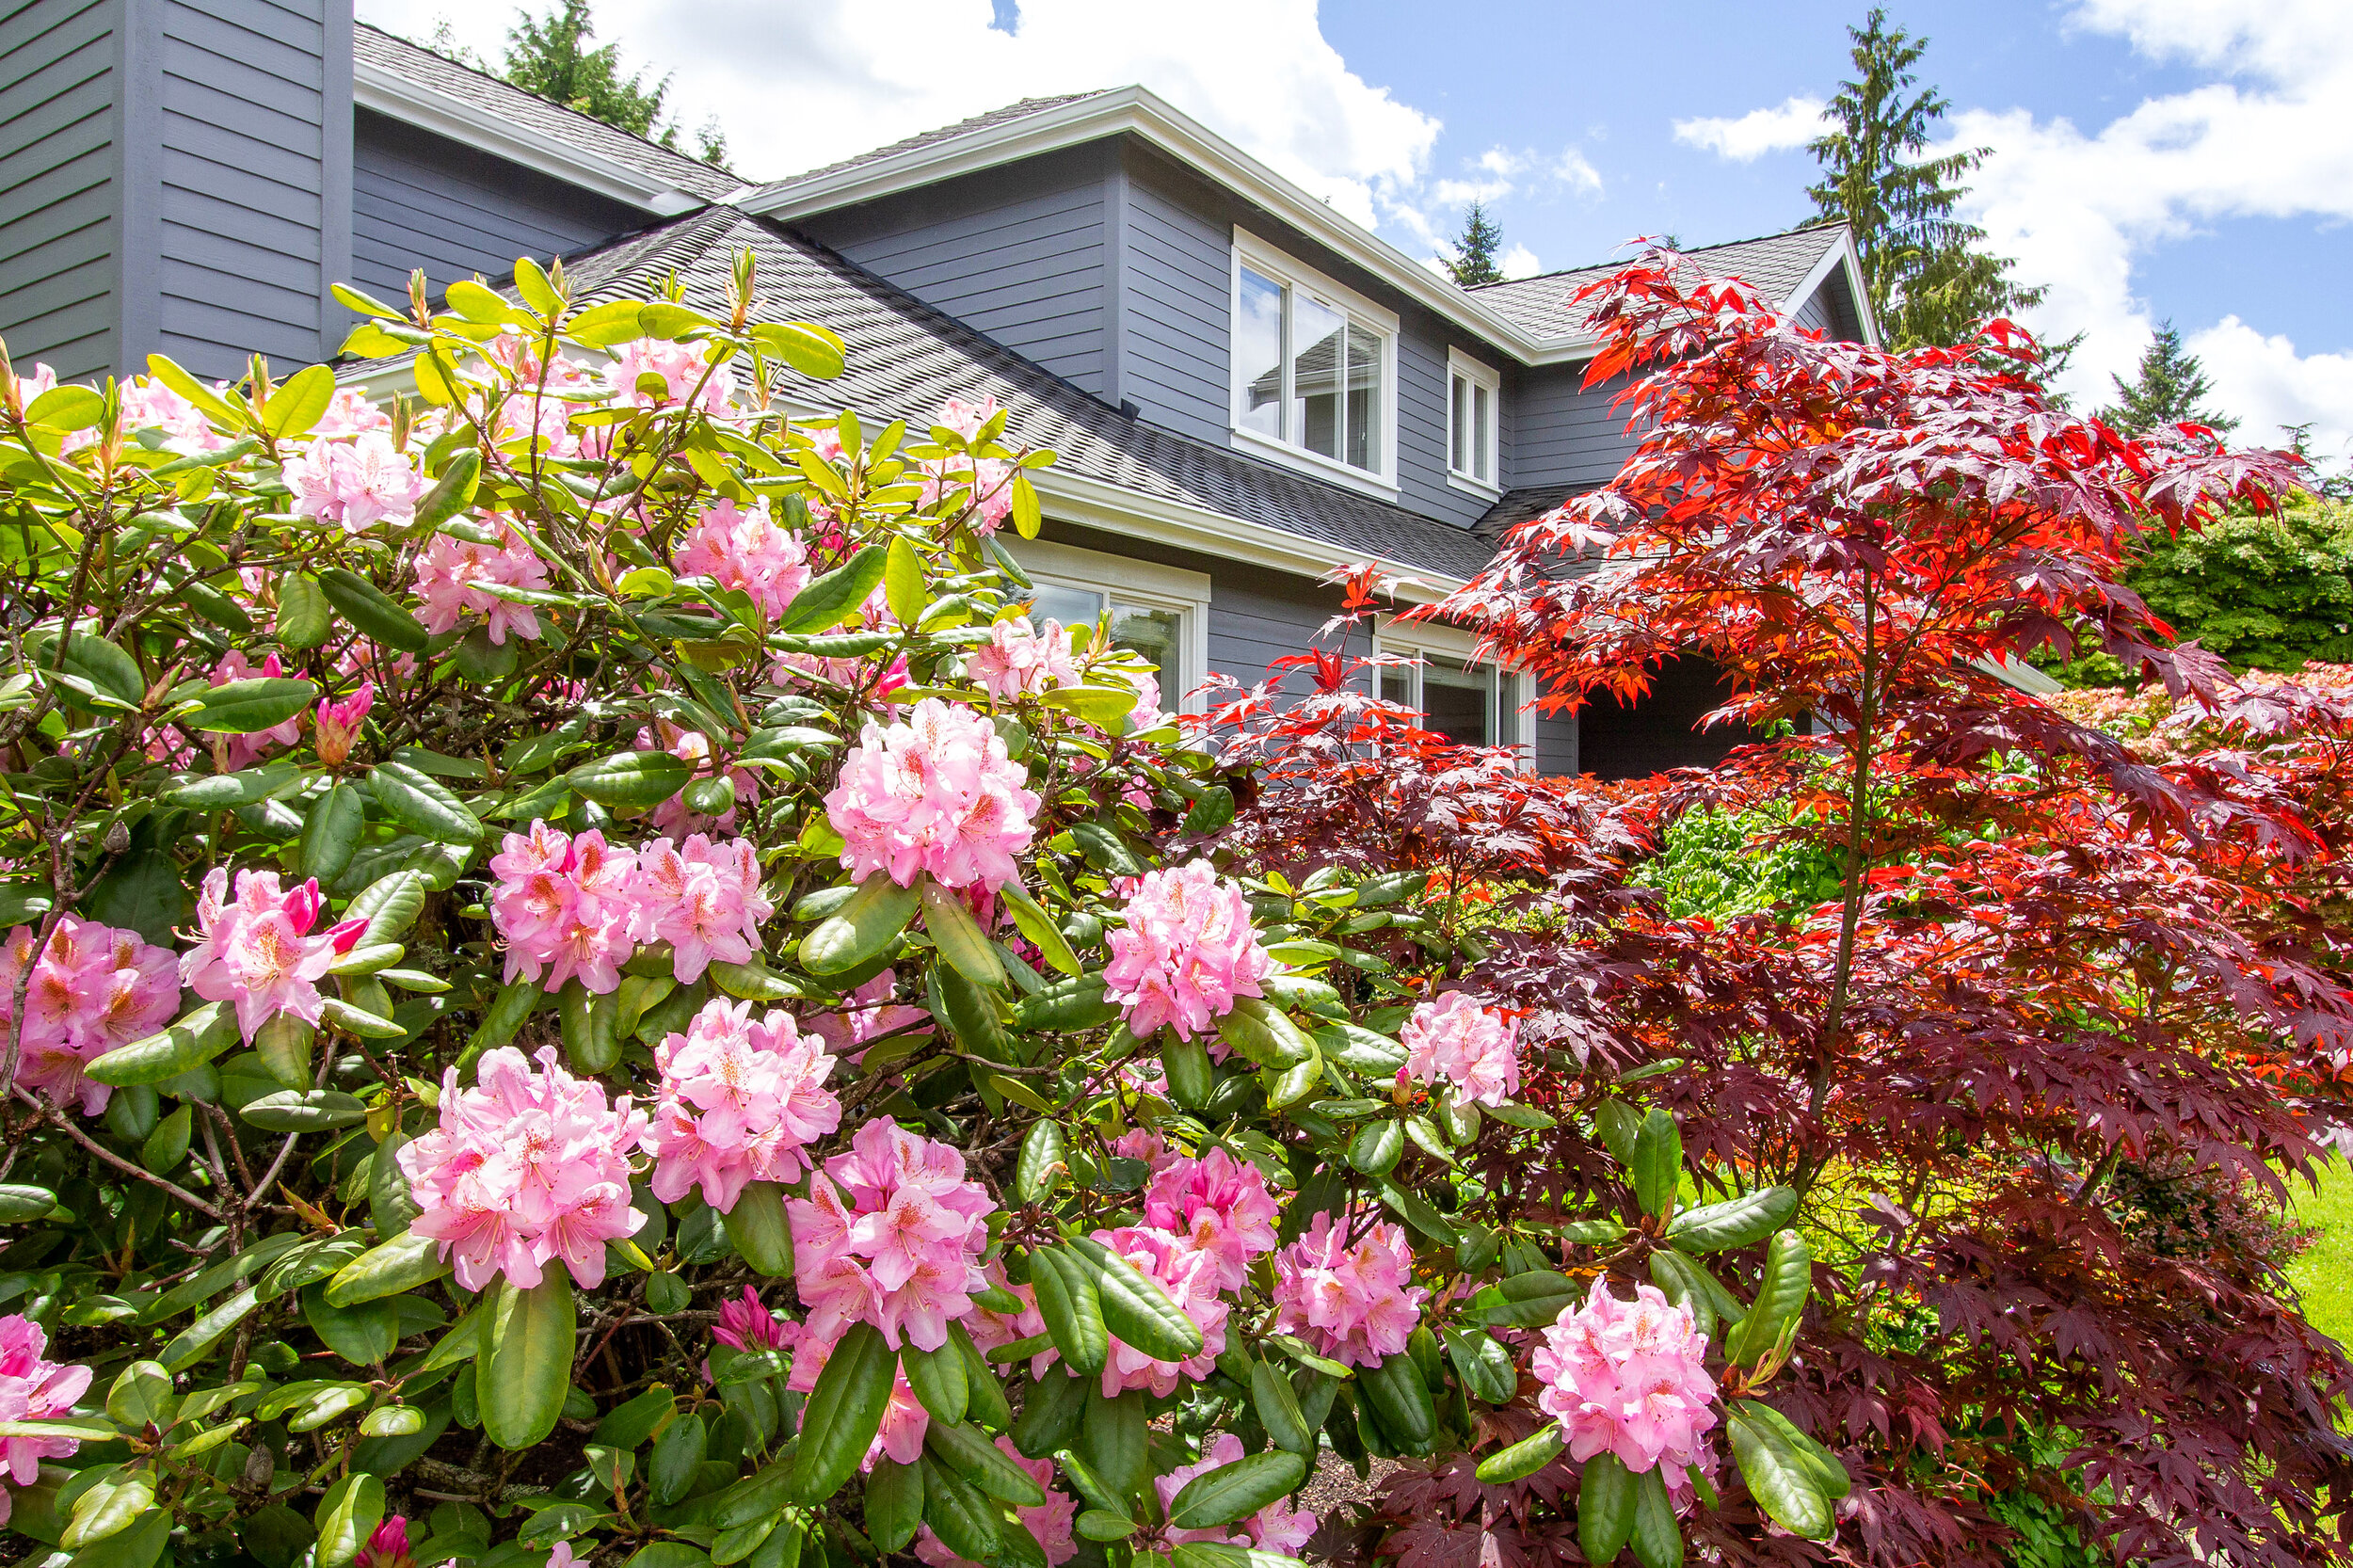  Delight in the beauty of nature as the garden comes into full bloom during the summer.&nbsp;&nbsp; 